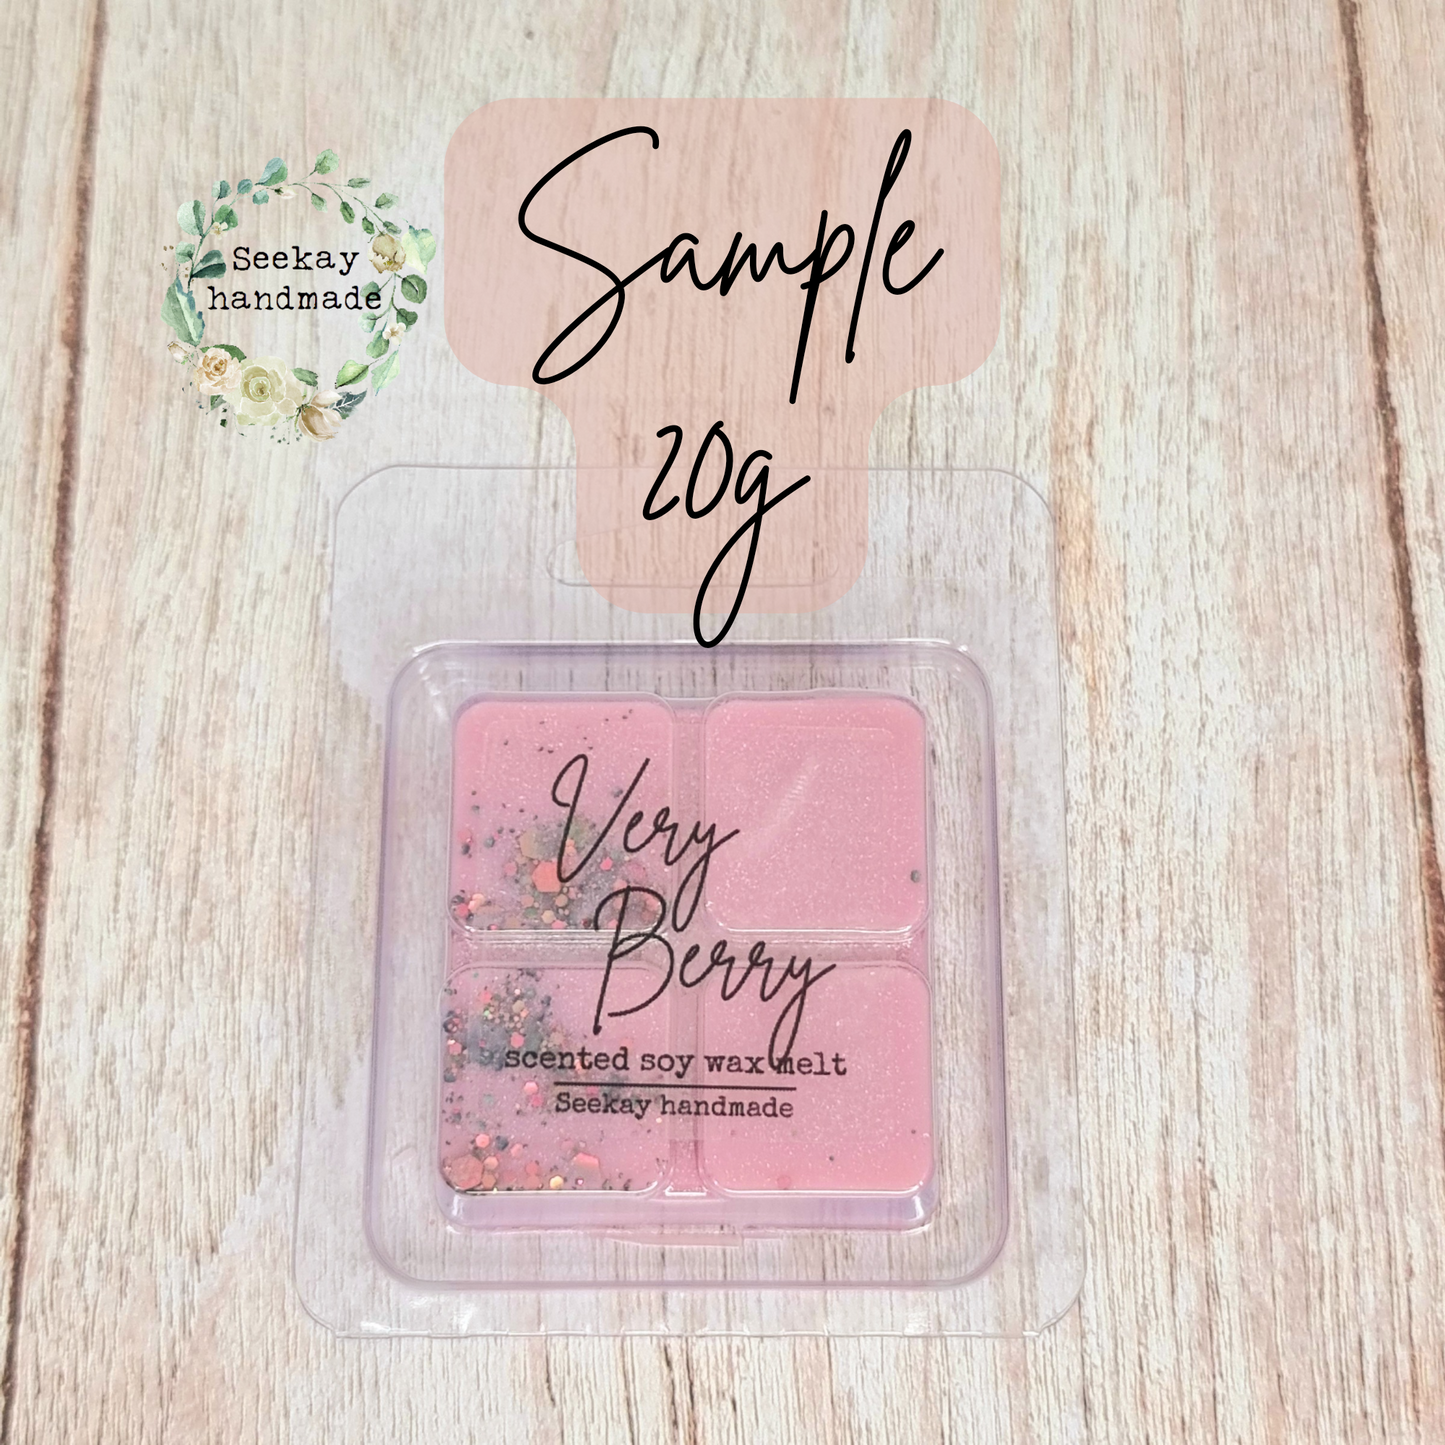 Very Berry scented soy wax melt